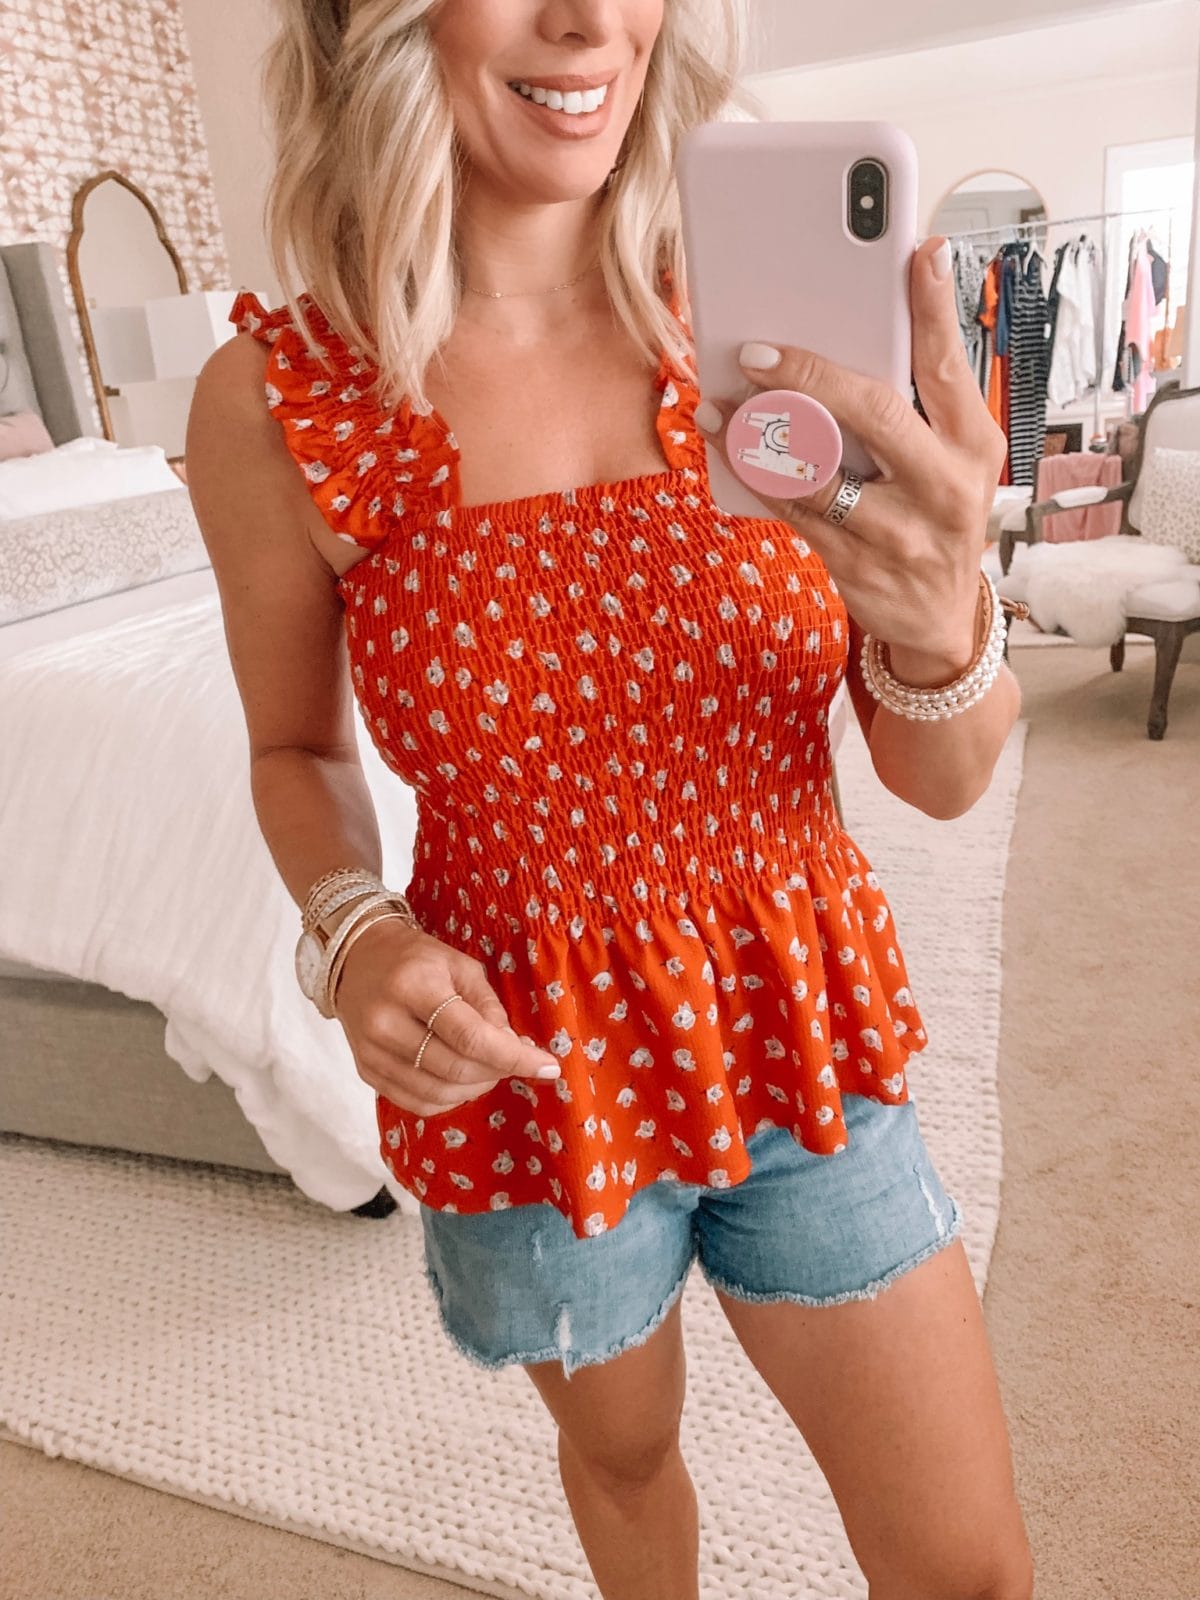 Amazon Fashion Haul - red floral top and jean shorts